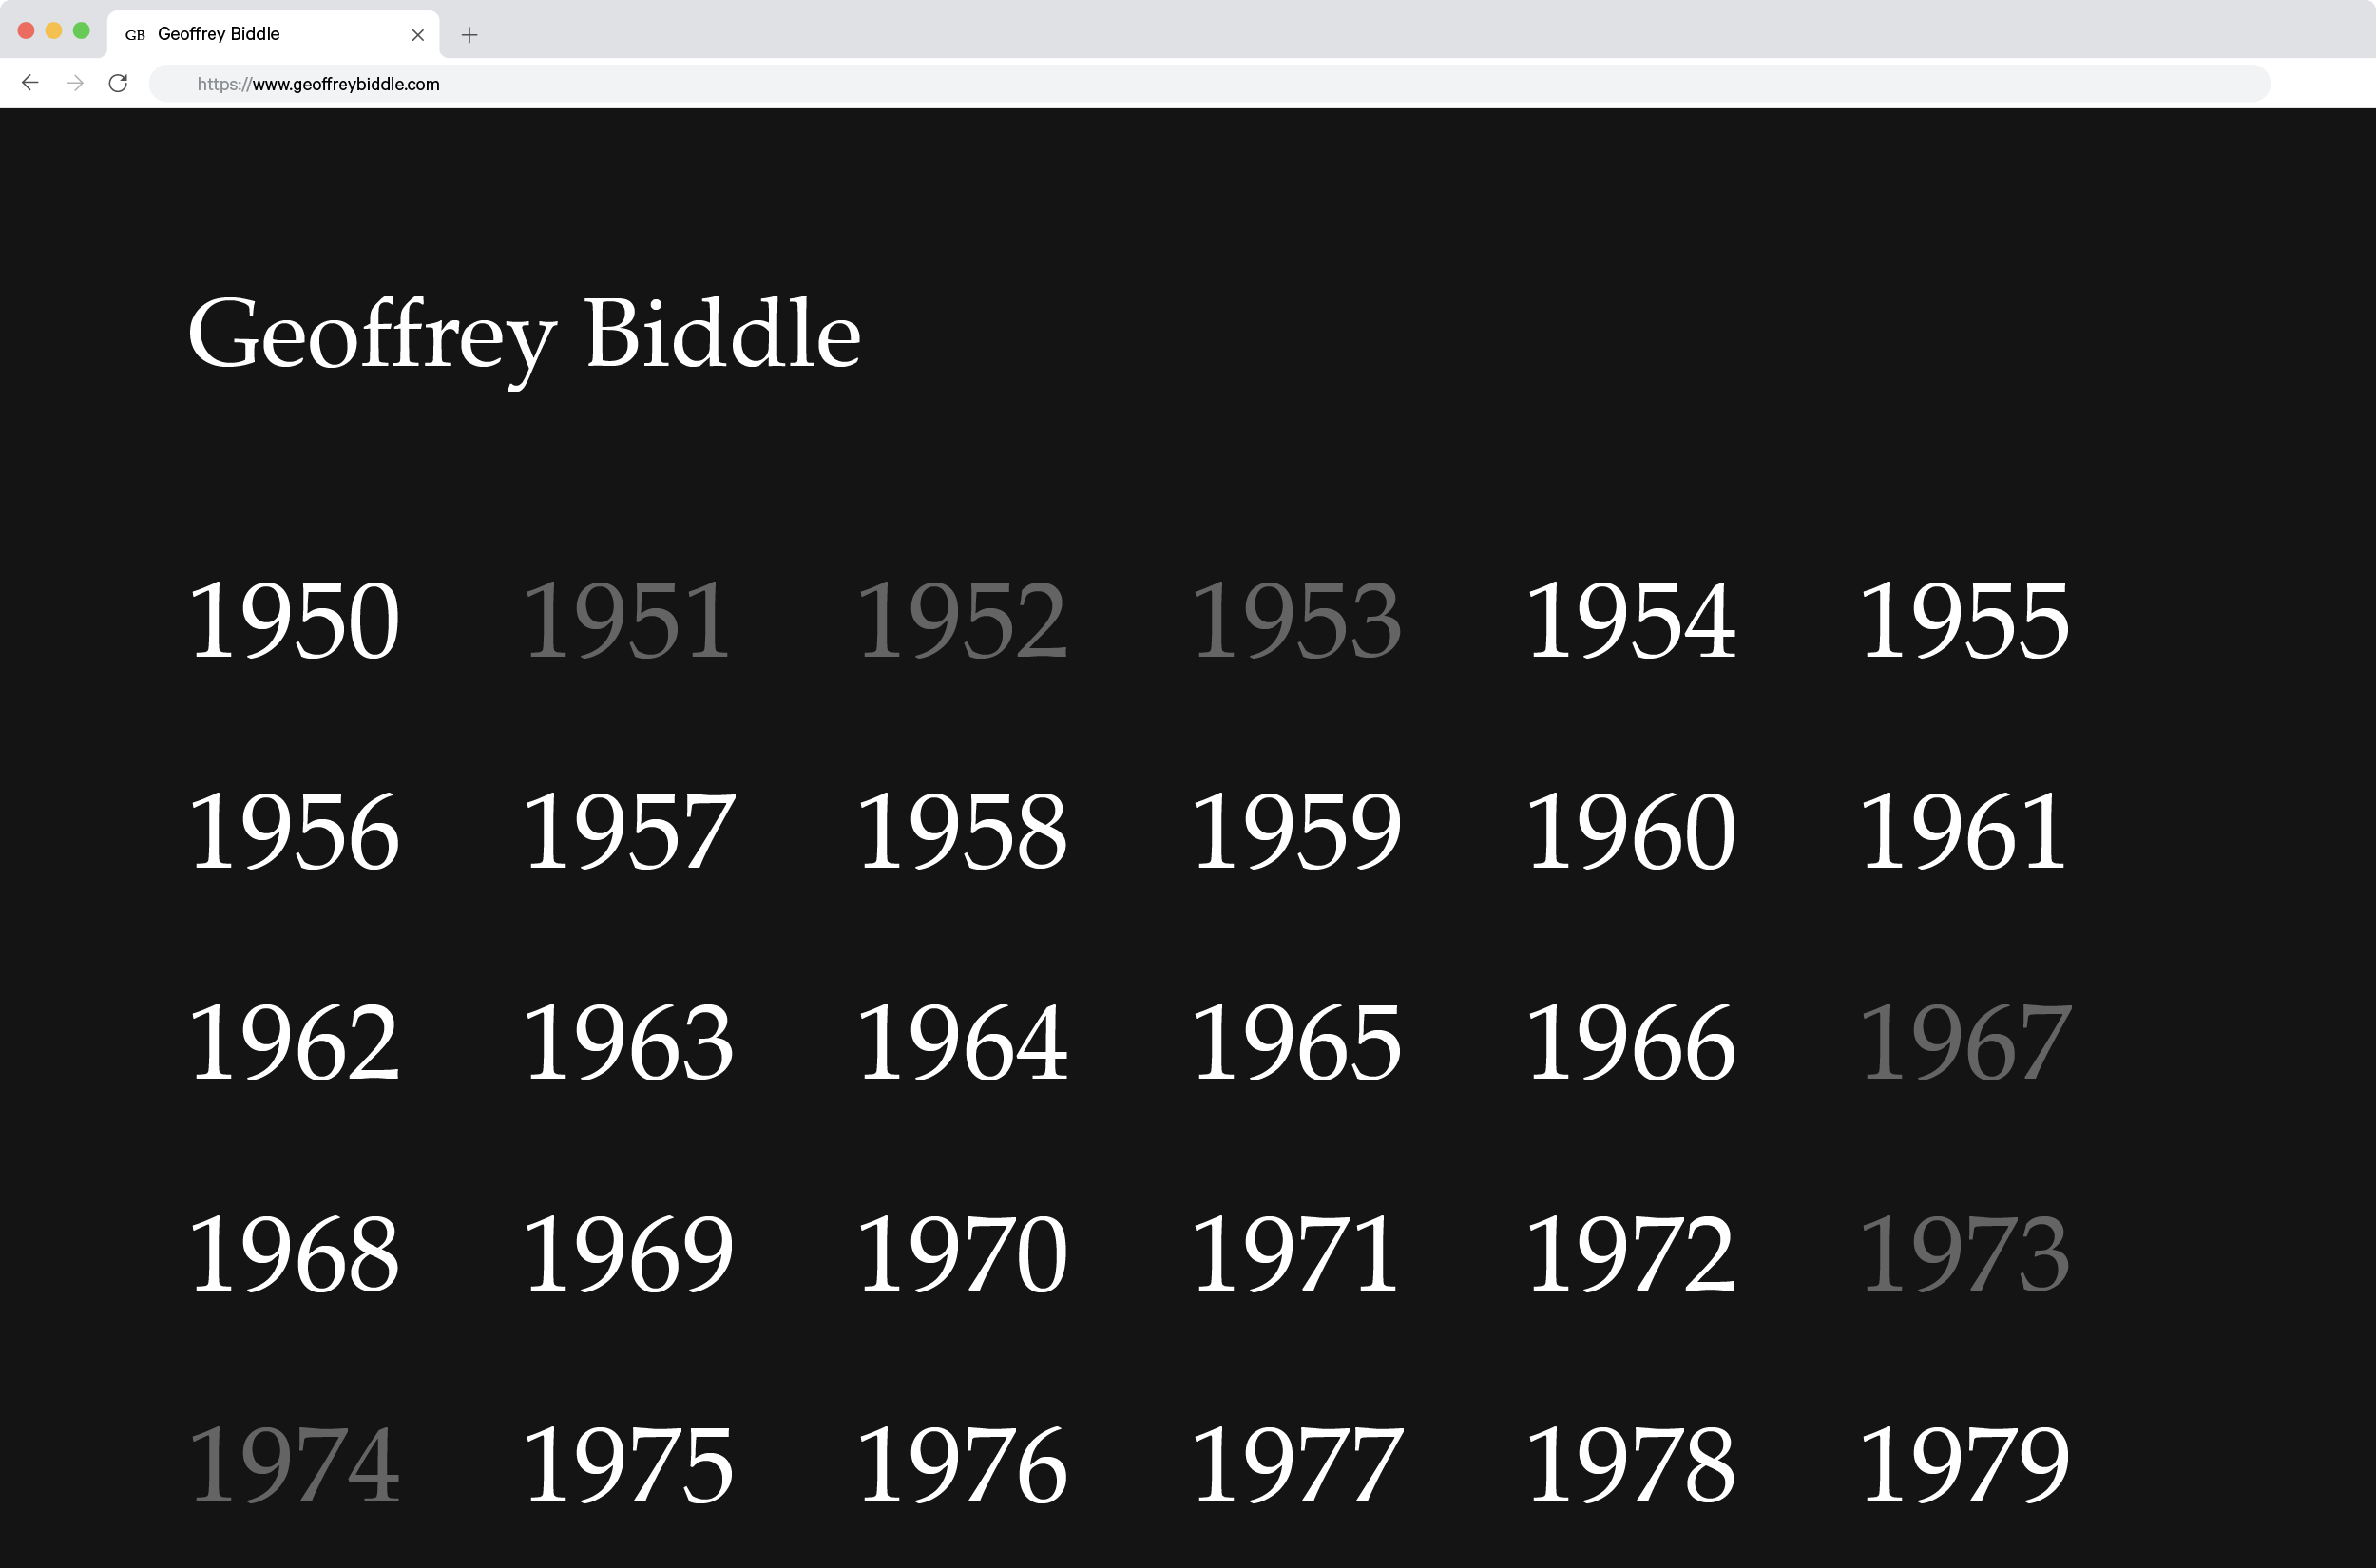 Screenshot of Geoffrey Biddle's website home page, which features his name and years from 1950 to 1979 in black, white, and grey.